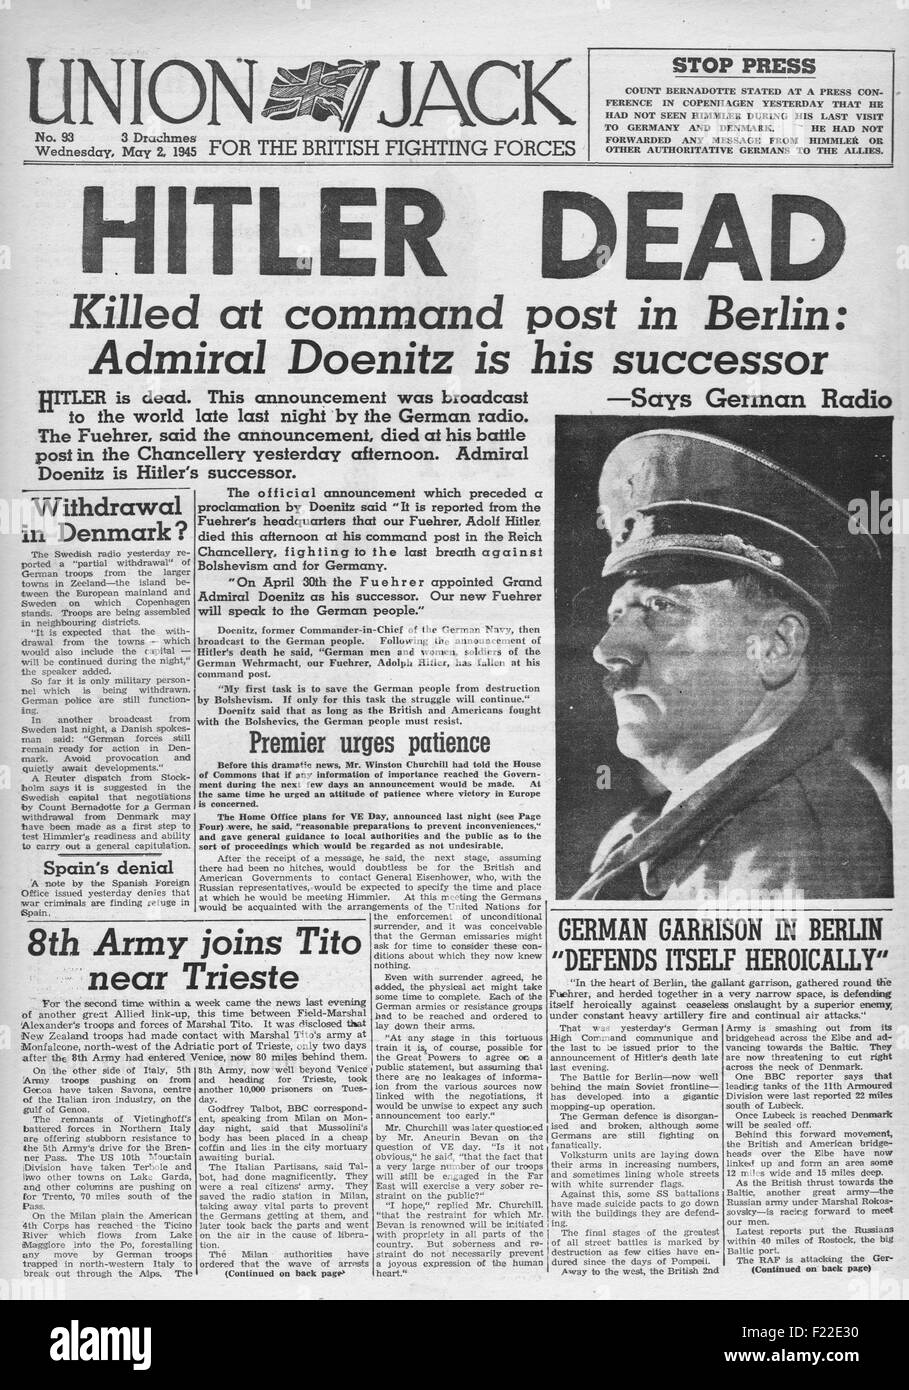 1945 Union Jack (British military newspaper) front page reporting the death of Adolf Hitler Stock Photo